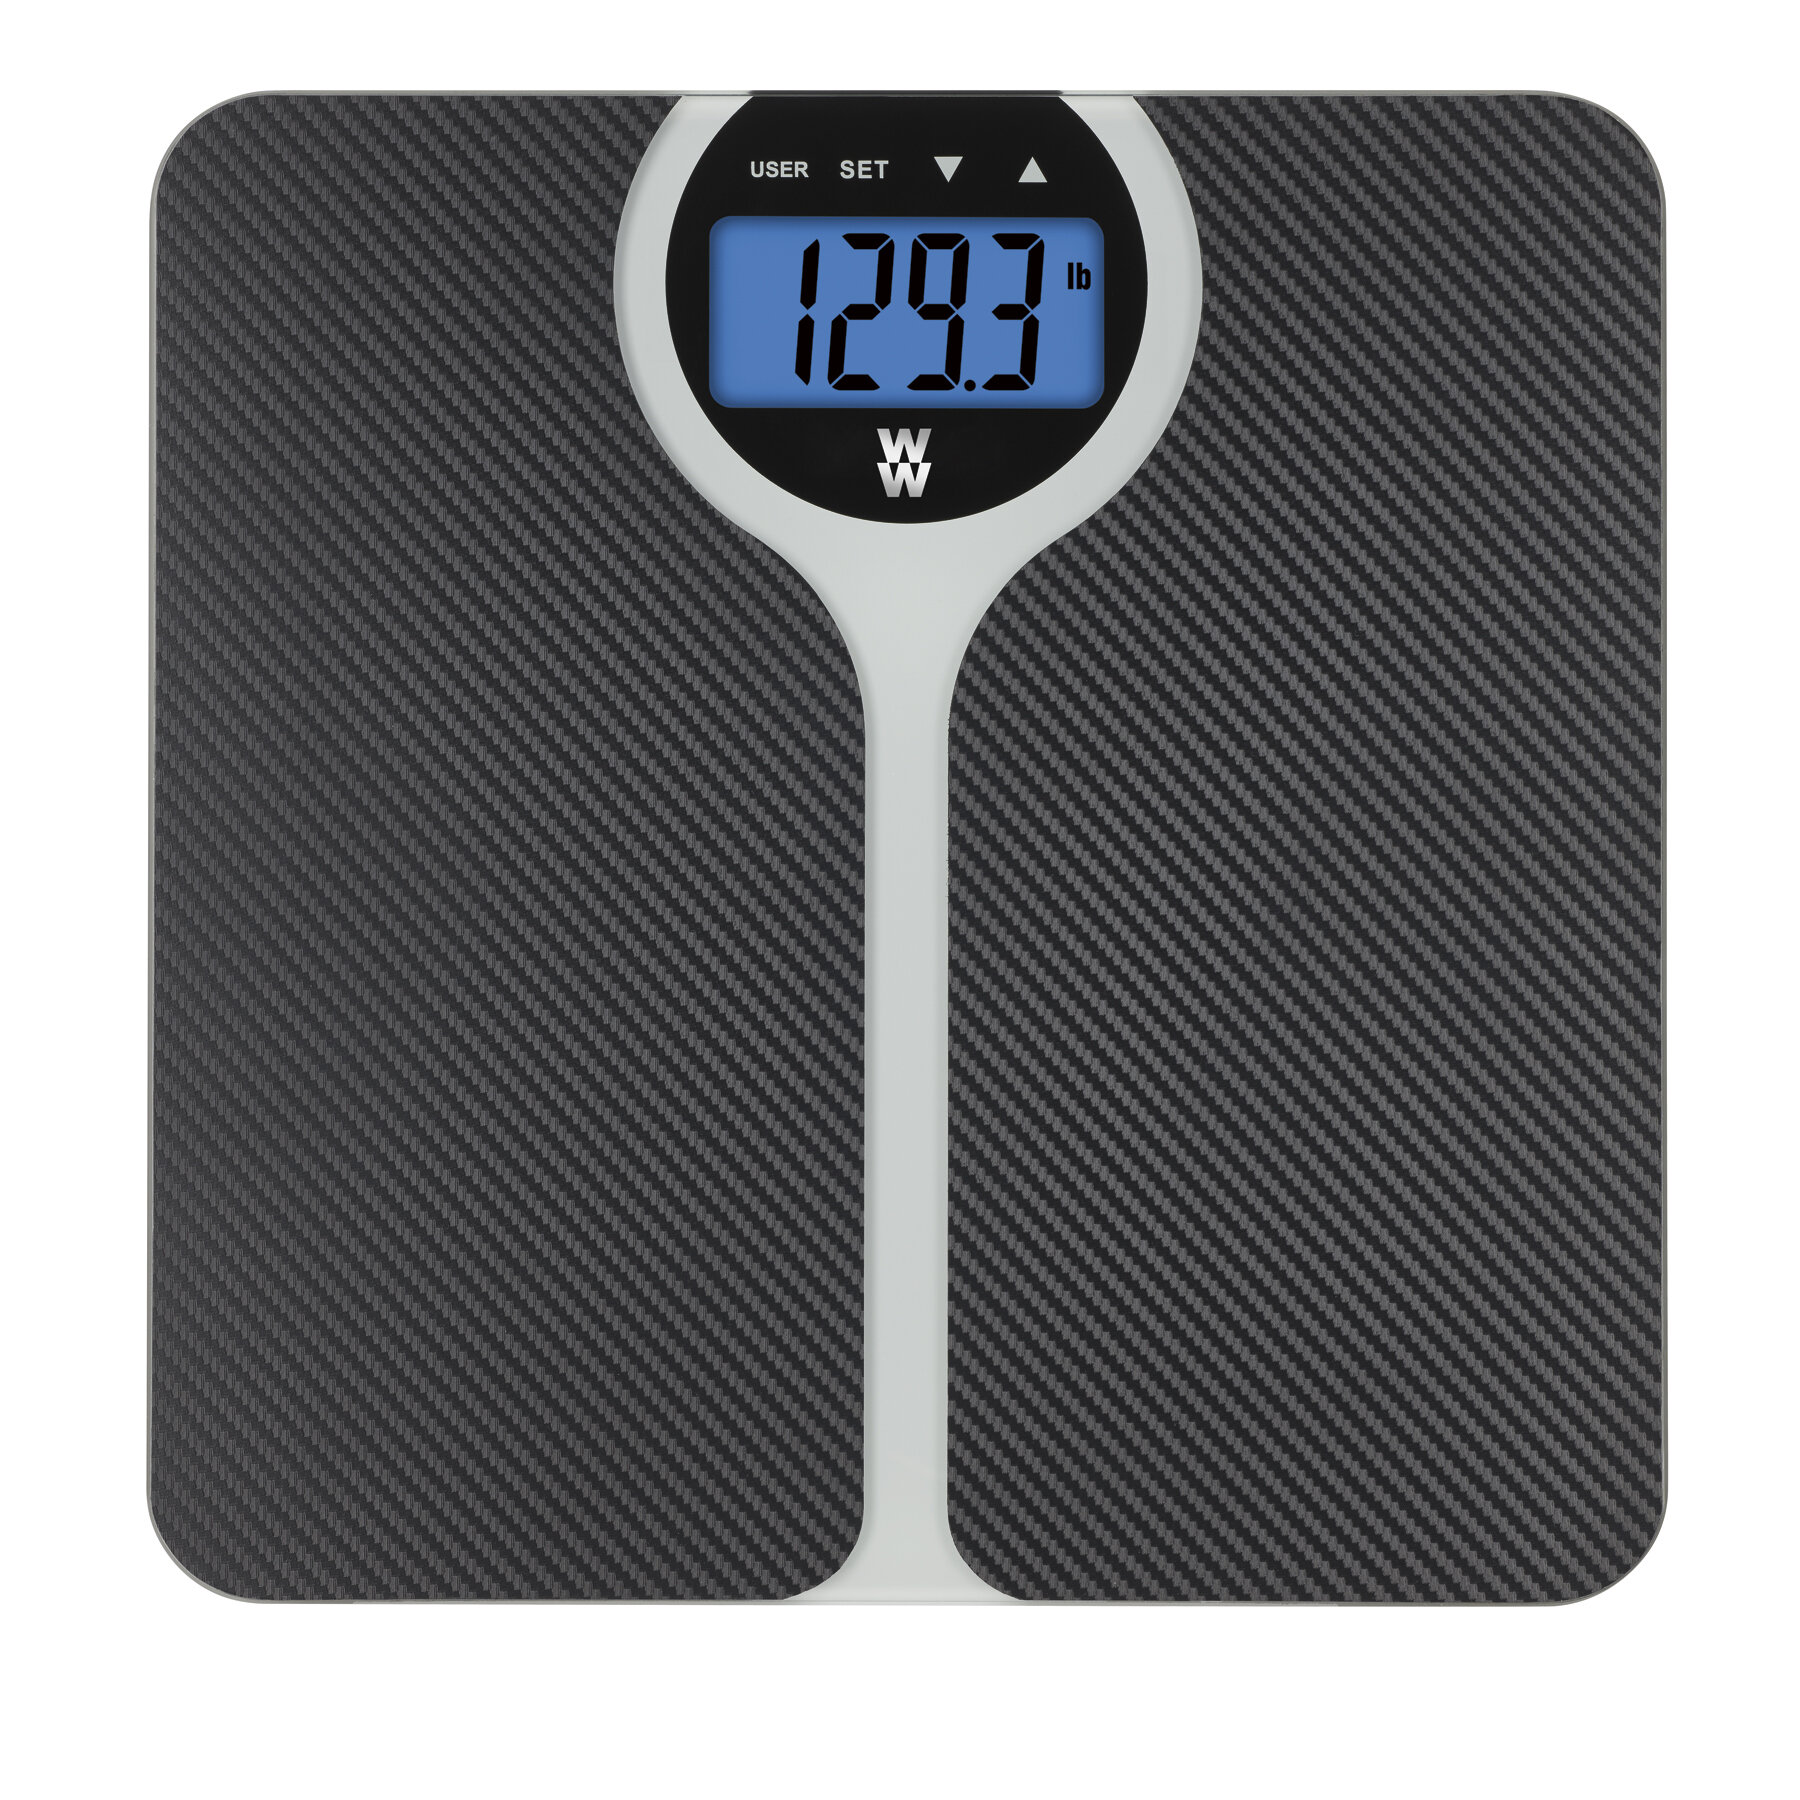 Ww Scales by Conair Digital Glass Scale With Blue Backlight Display